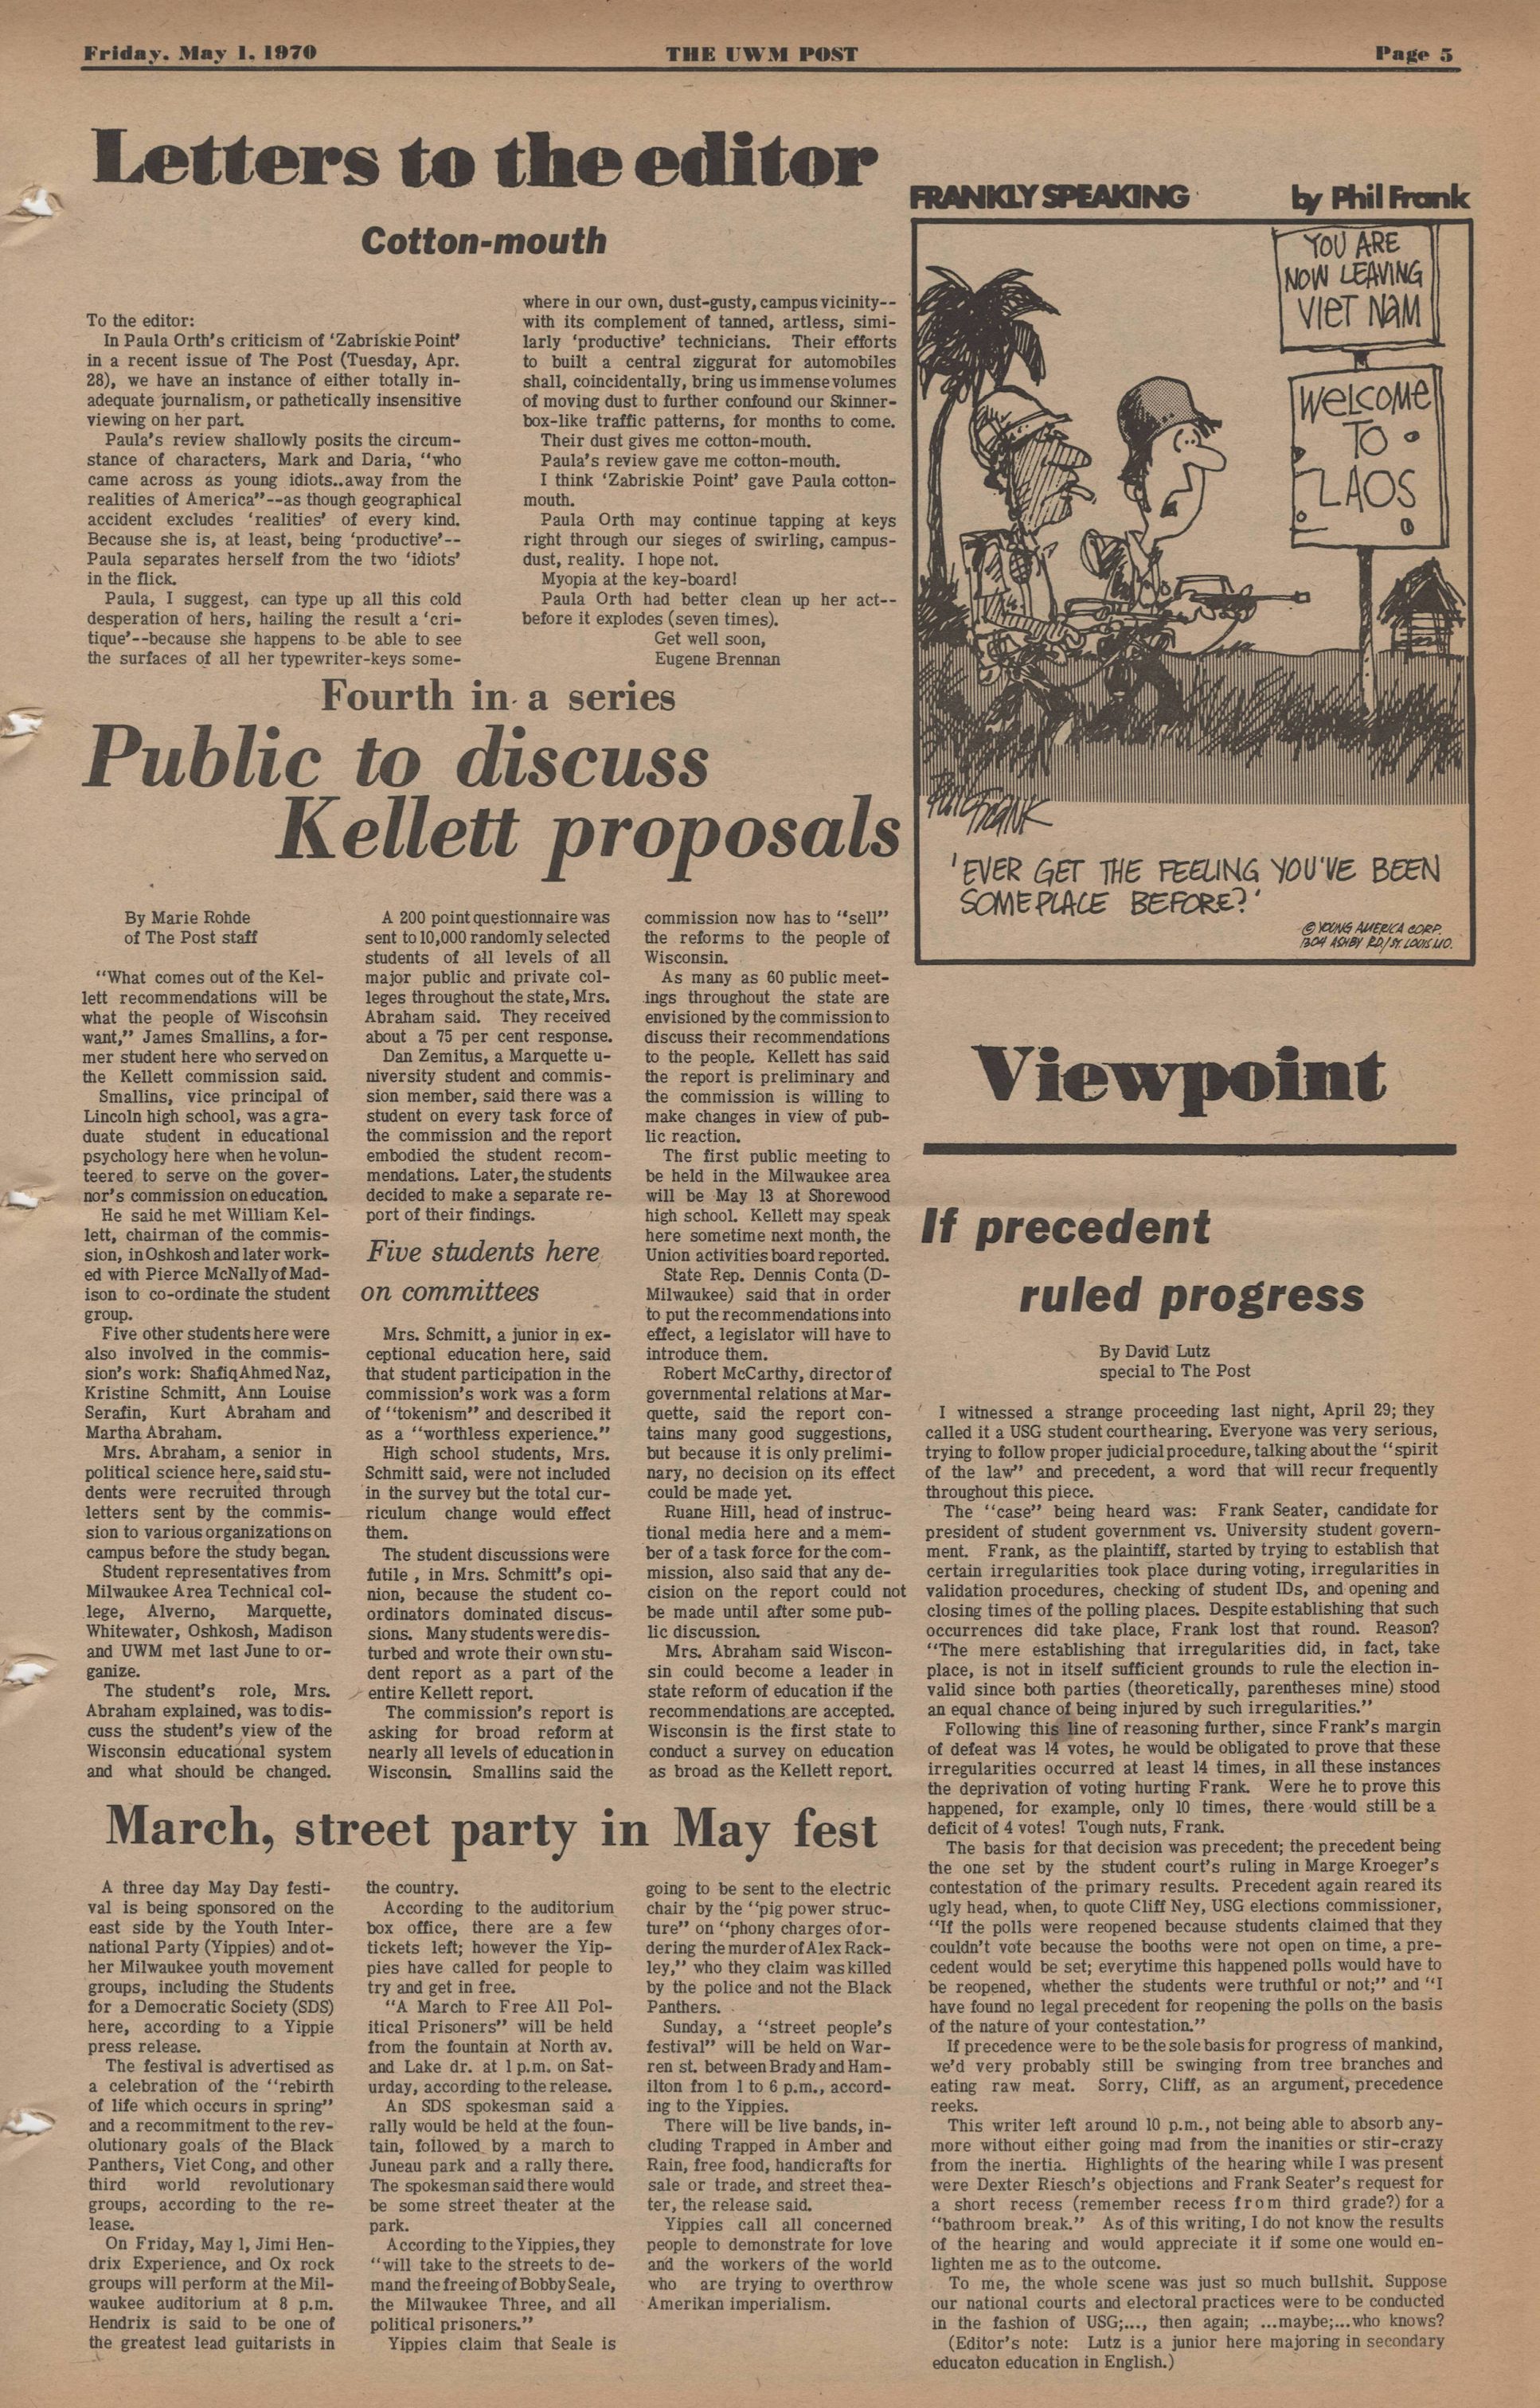 This issue of the UWM Post from 1970 features an announcement for an upcoming march and festival  in support of "workers of the world who are trying to overthrow Amerikan imperialism." 